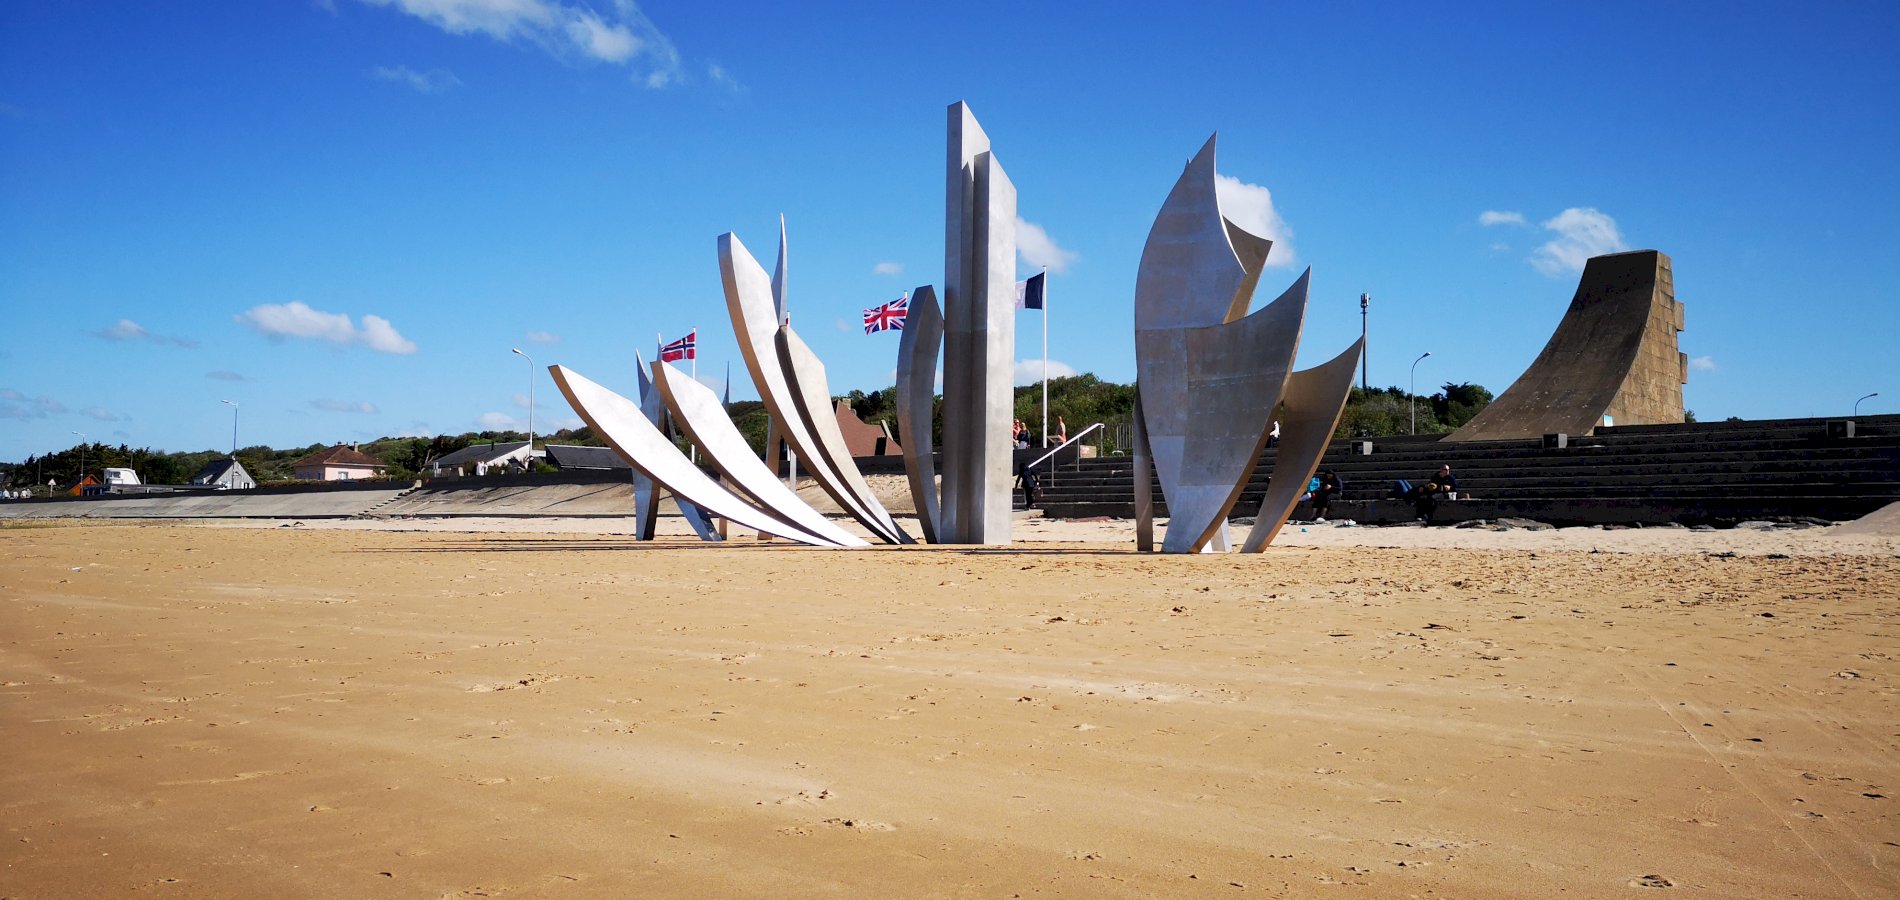 Ophorus Tours - From Le Havre Cruise Port to Normandy D-DAY Landing Beaches shore excursion private